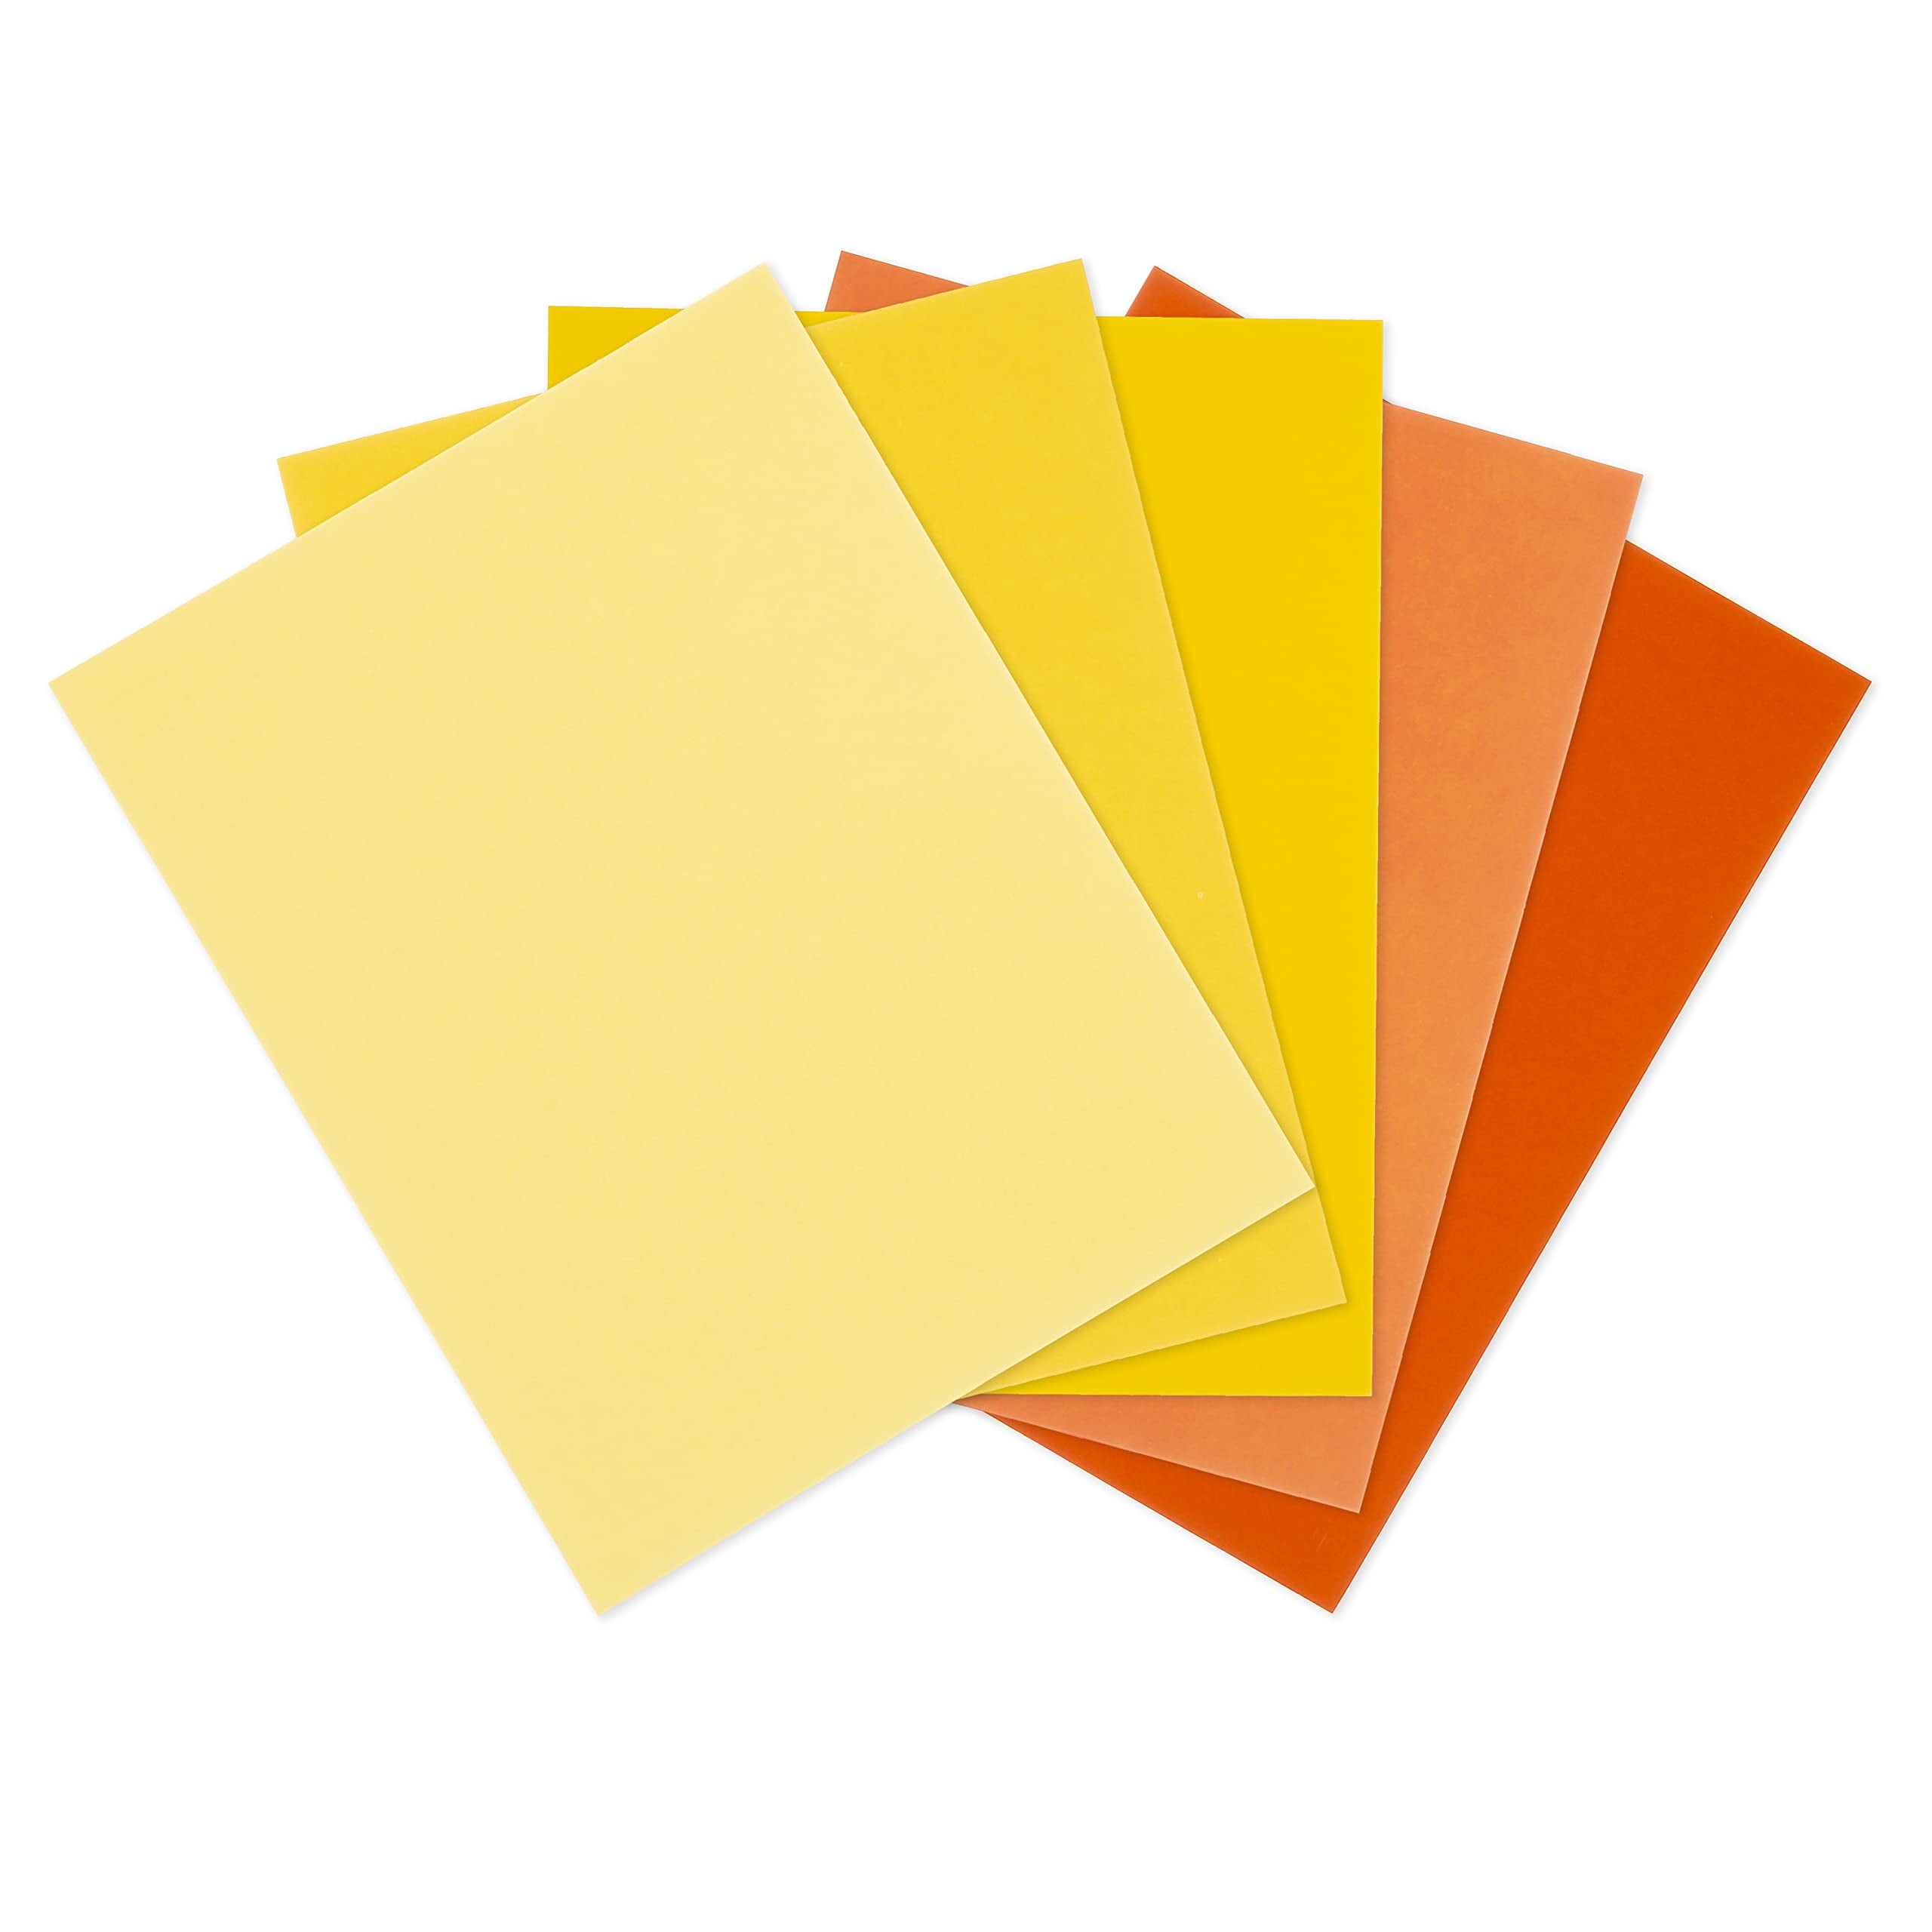 Daffodil Yellow Cardstock - 8.5 x 11 inch - 65lb Cover - 50 Sheets